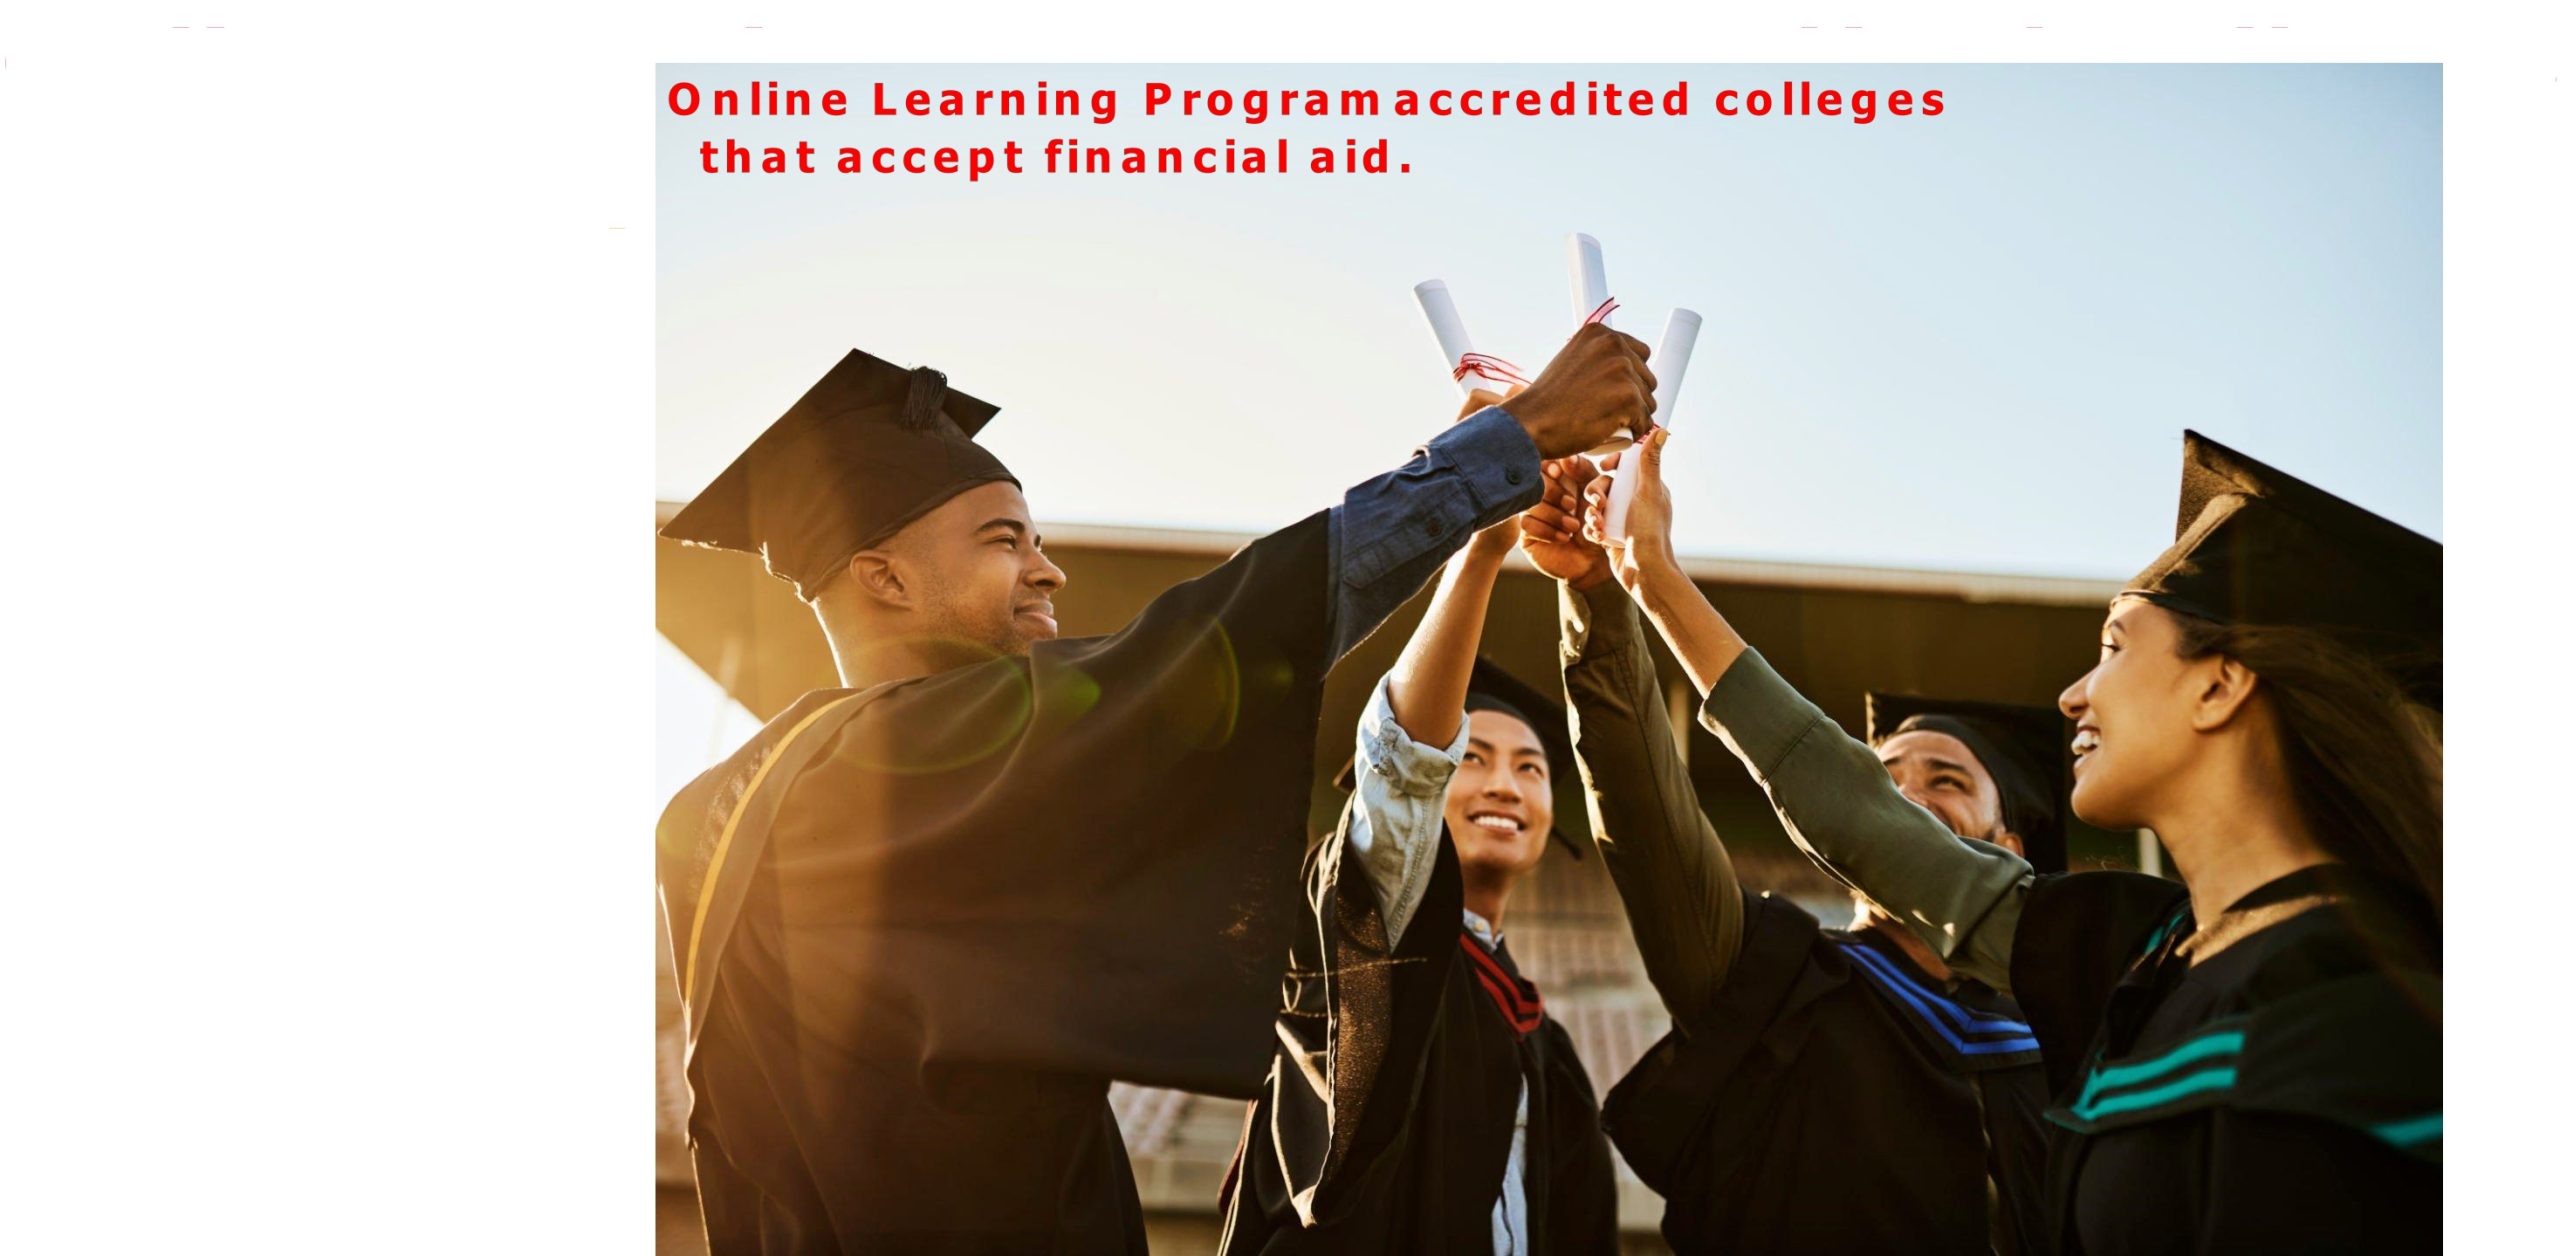 Online Learning Program: accredited colleges that accept financial aid.